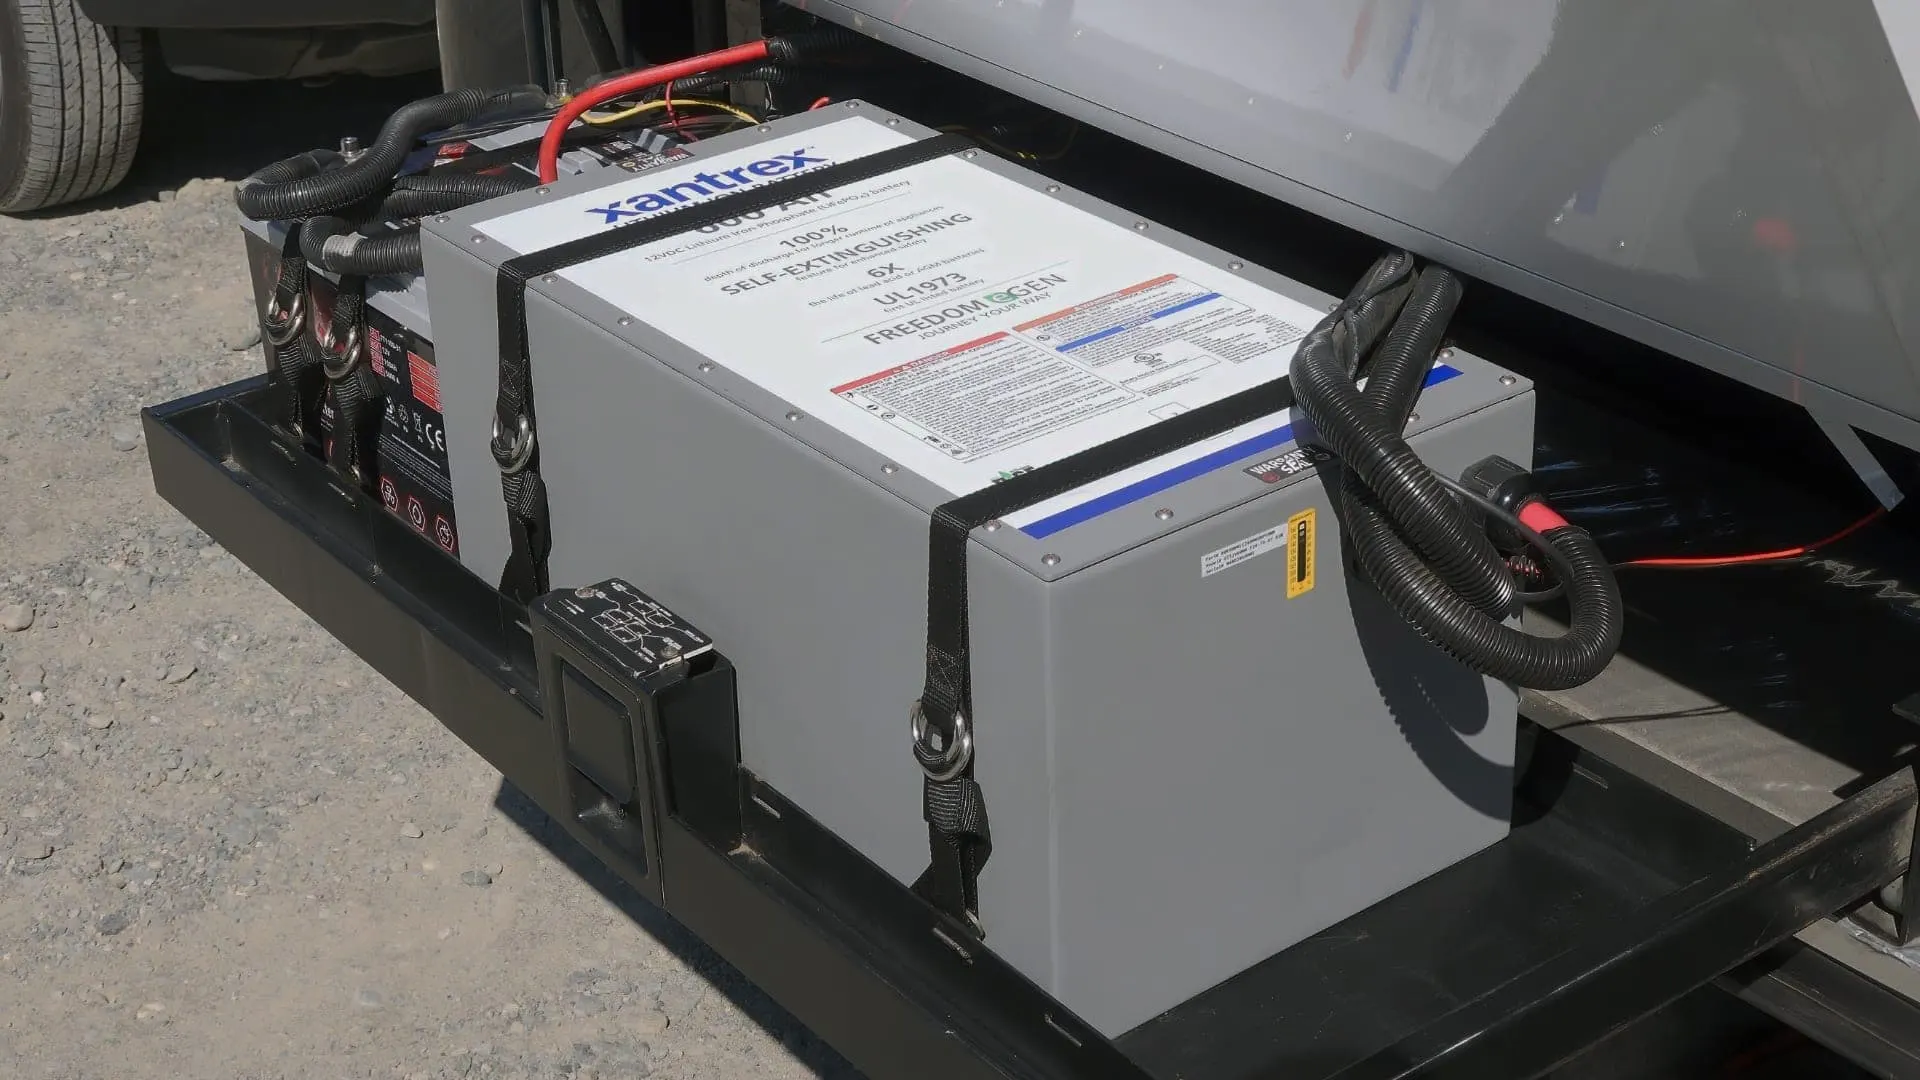 We use a battery disconnect with our Xantrex Freedom lithium-ion battery if we're away from the RV for an extended period.